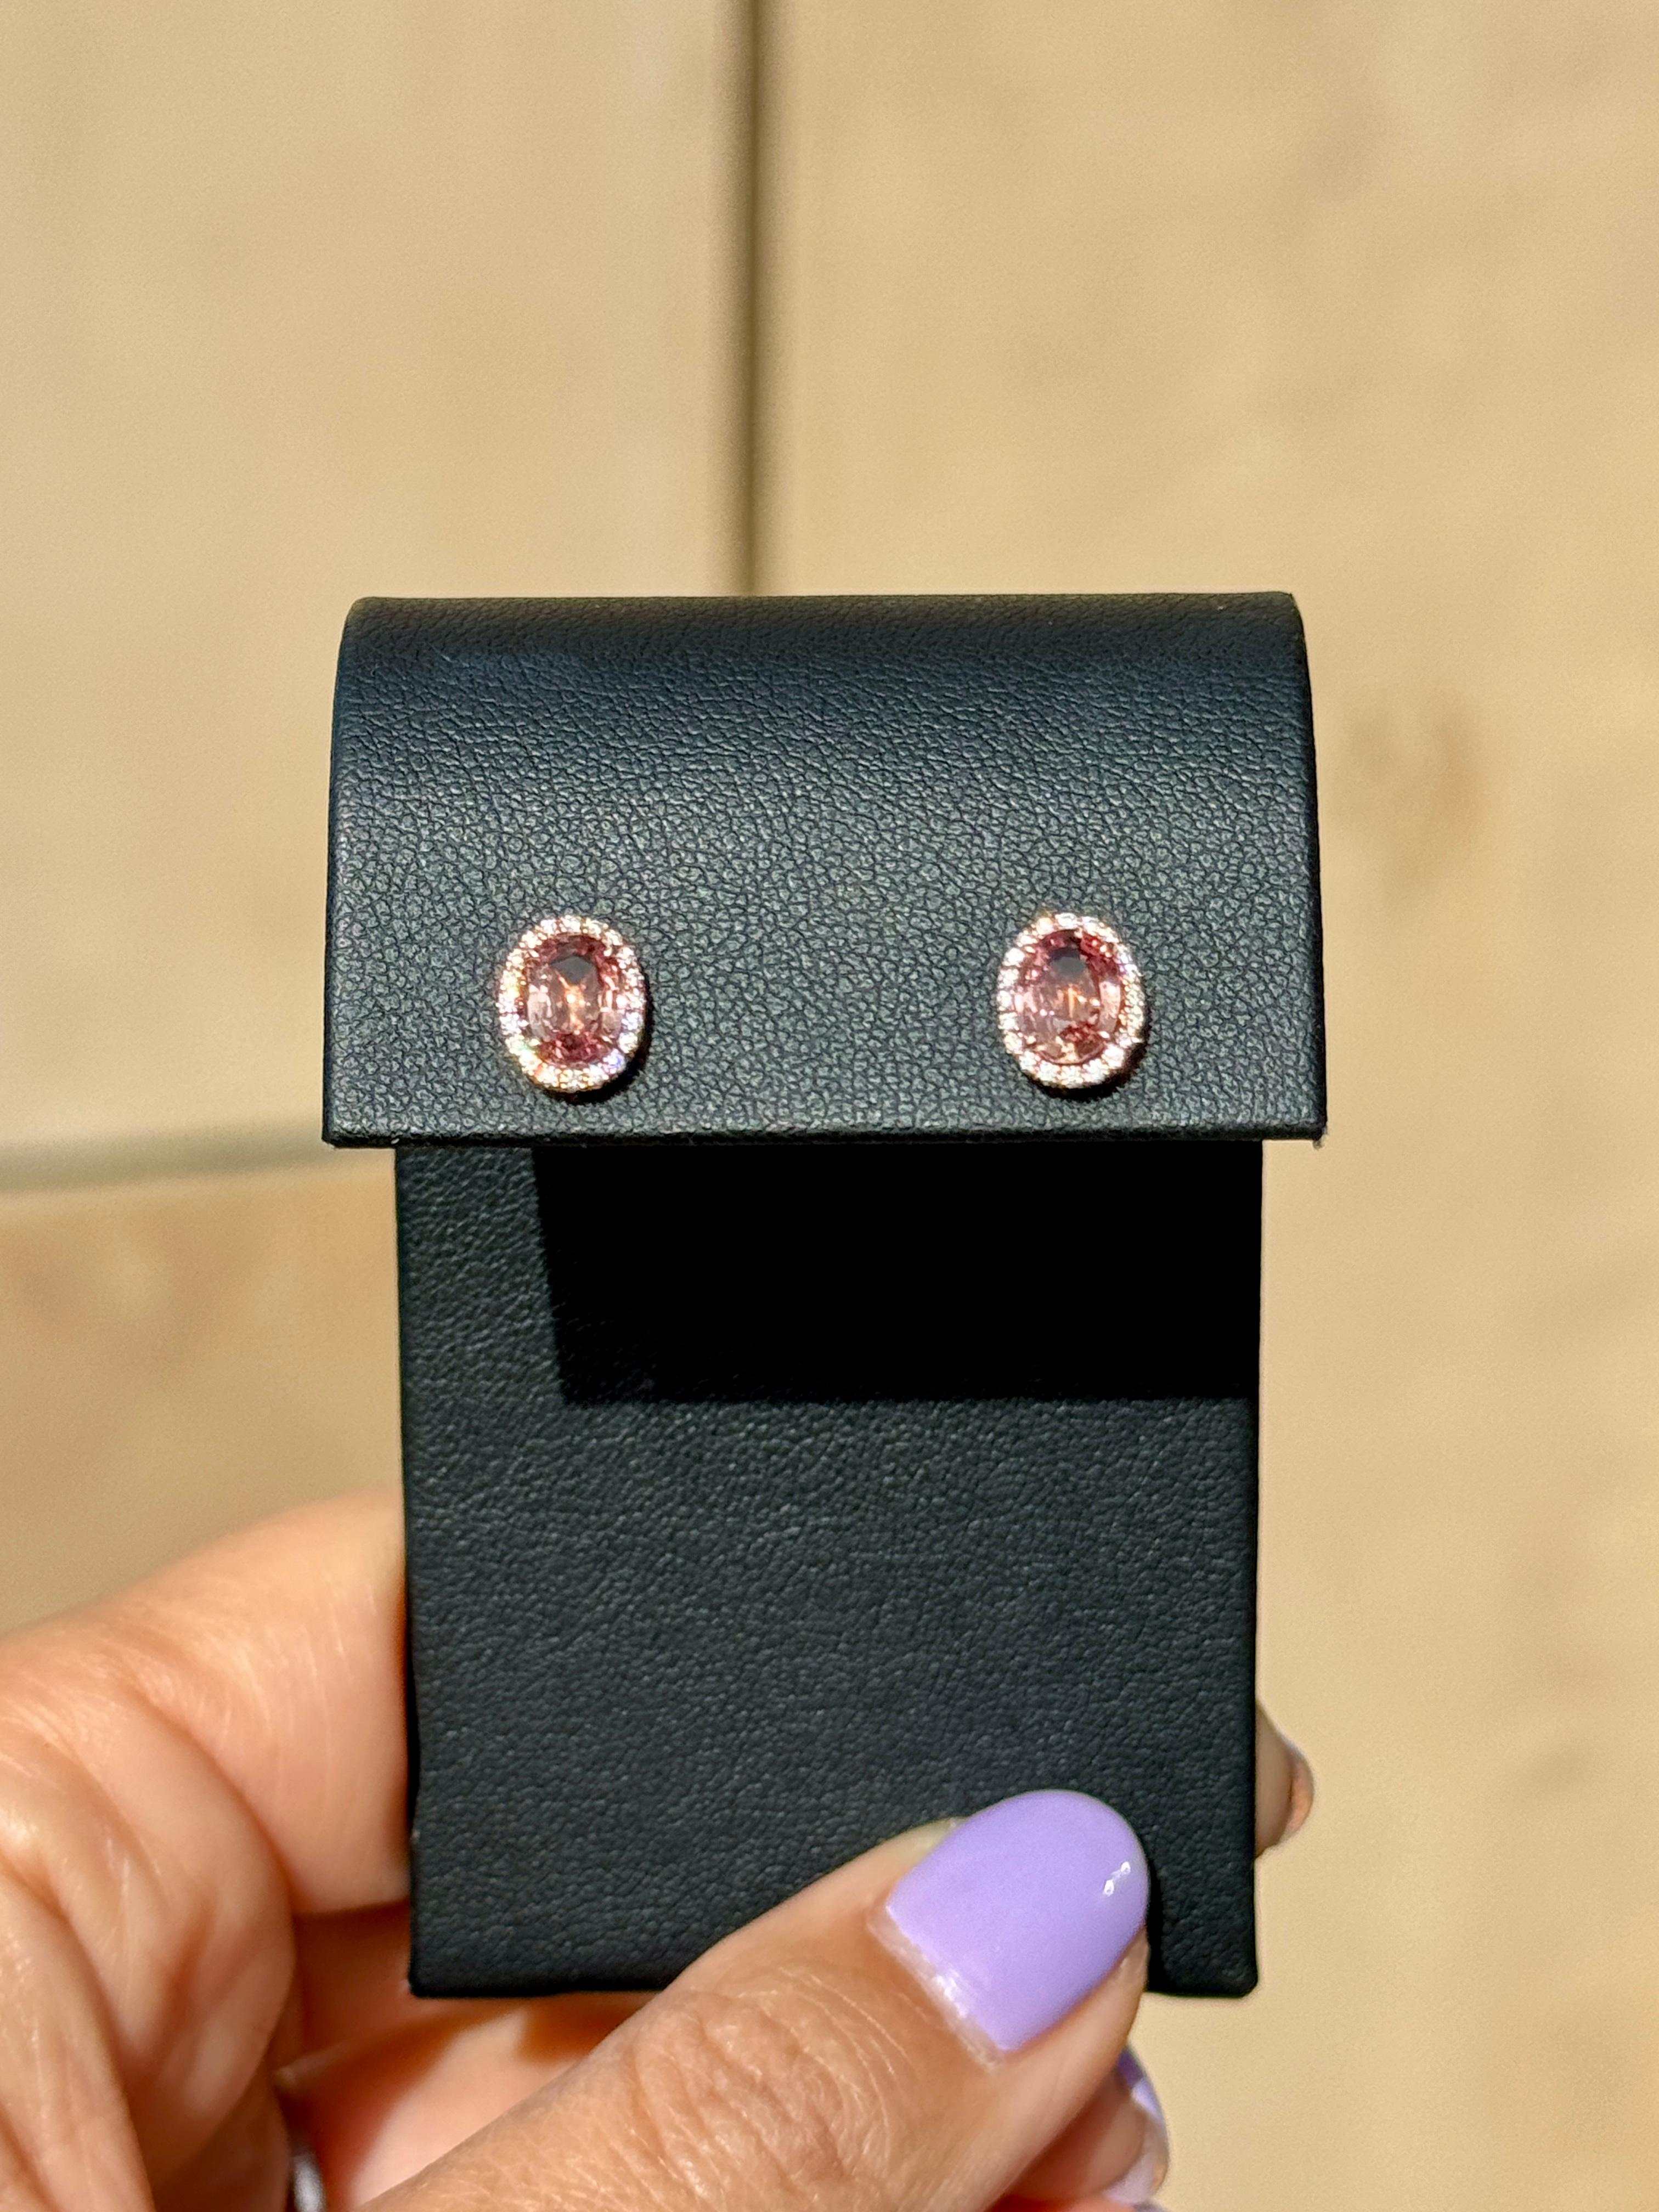 Certifies as Brown-Pinkish Orange resembling Padparadscha Sapphire with 0.17ct G/VS diamonds set in 18k rose gold mountings with 14k rose gold backs.